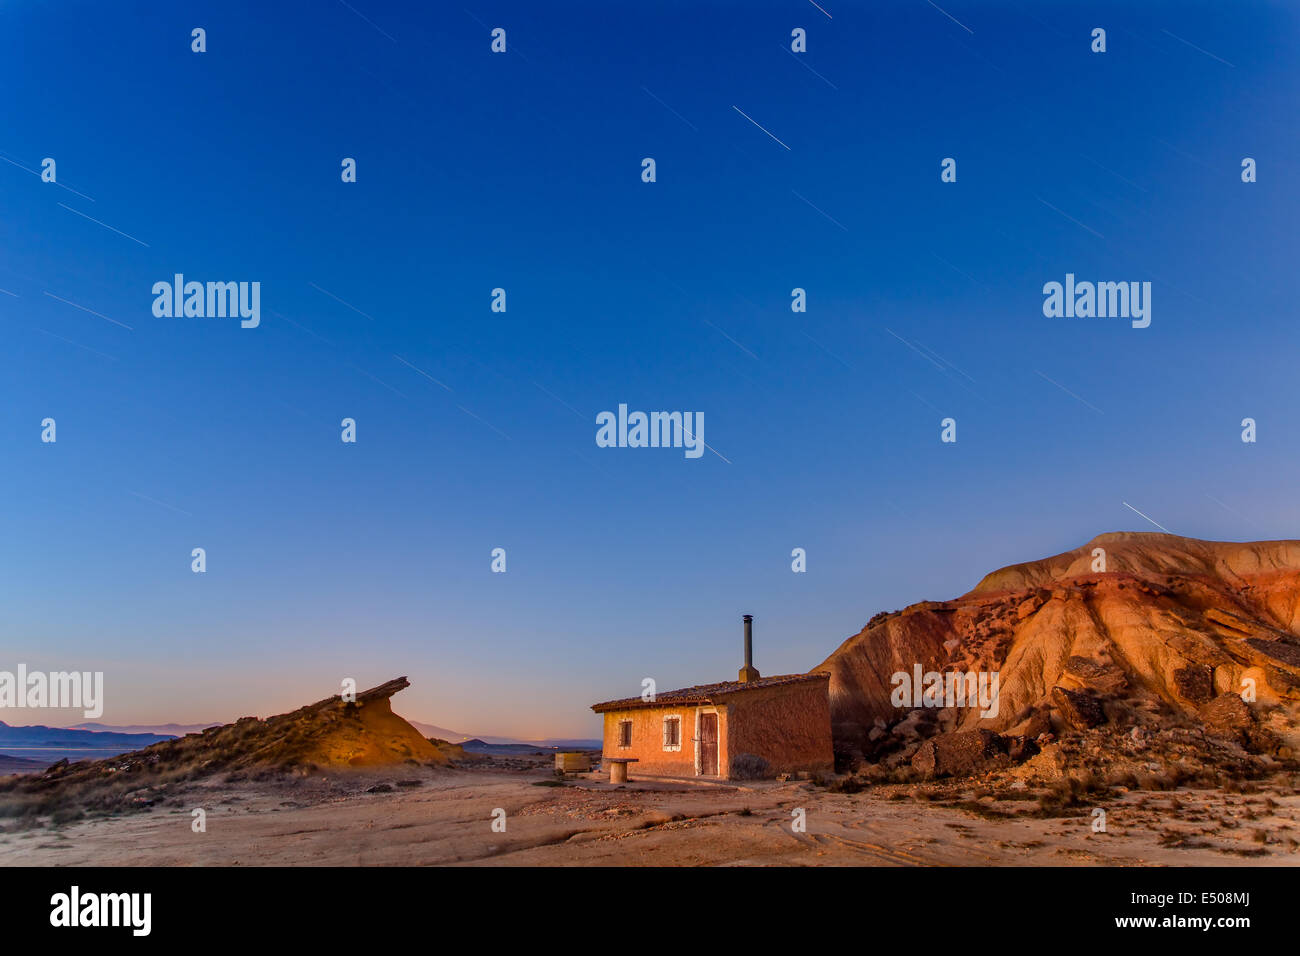 Star trail over a small house at Bardenas Reales Stock Photo